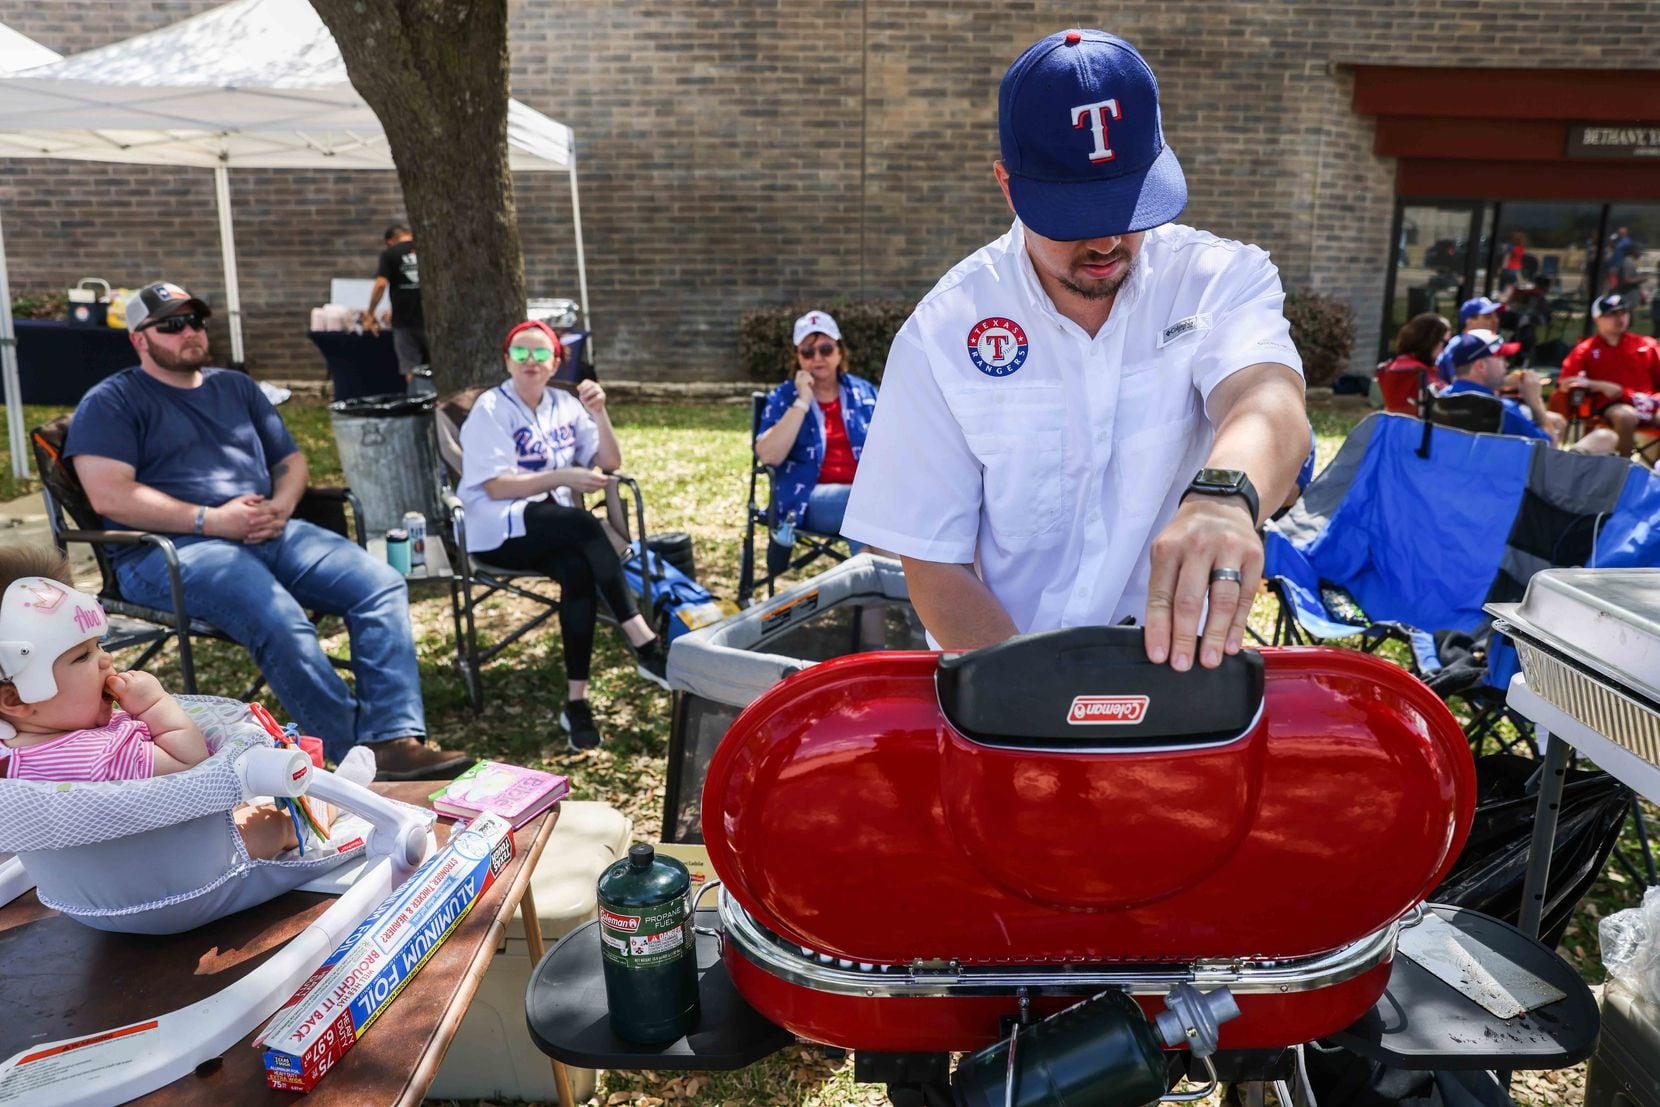 Sean Smith next to his daughter Ava Smith cooks some burgers outside the Globe Life Field in Arlington, Texas on Monday, April 5, 2021,  before the game between Texas Rangers and Toronto Blue Jays on opening day. (Lola Gomez/The Dallas Morning News)